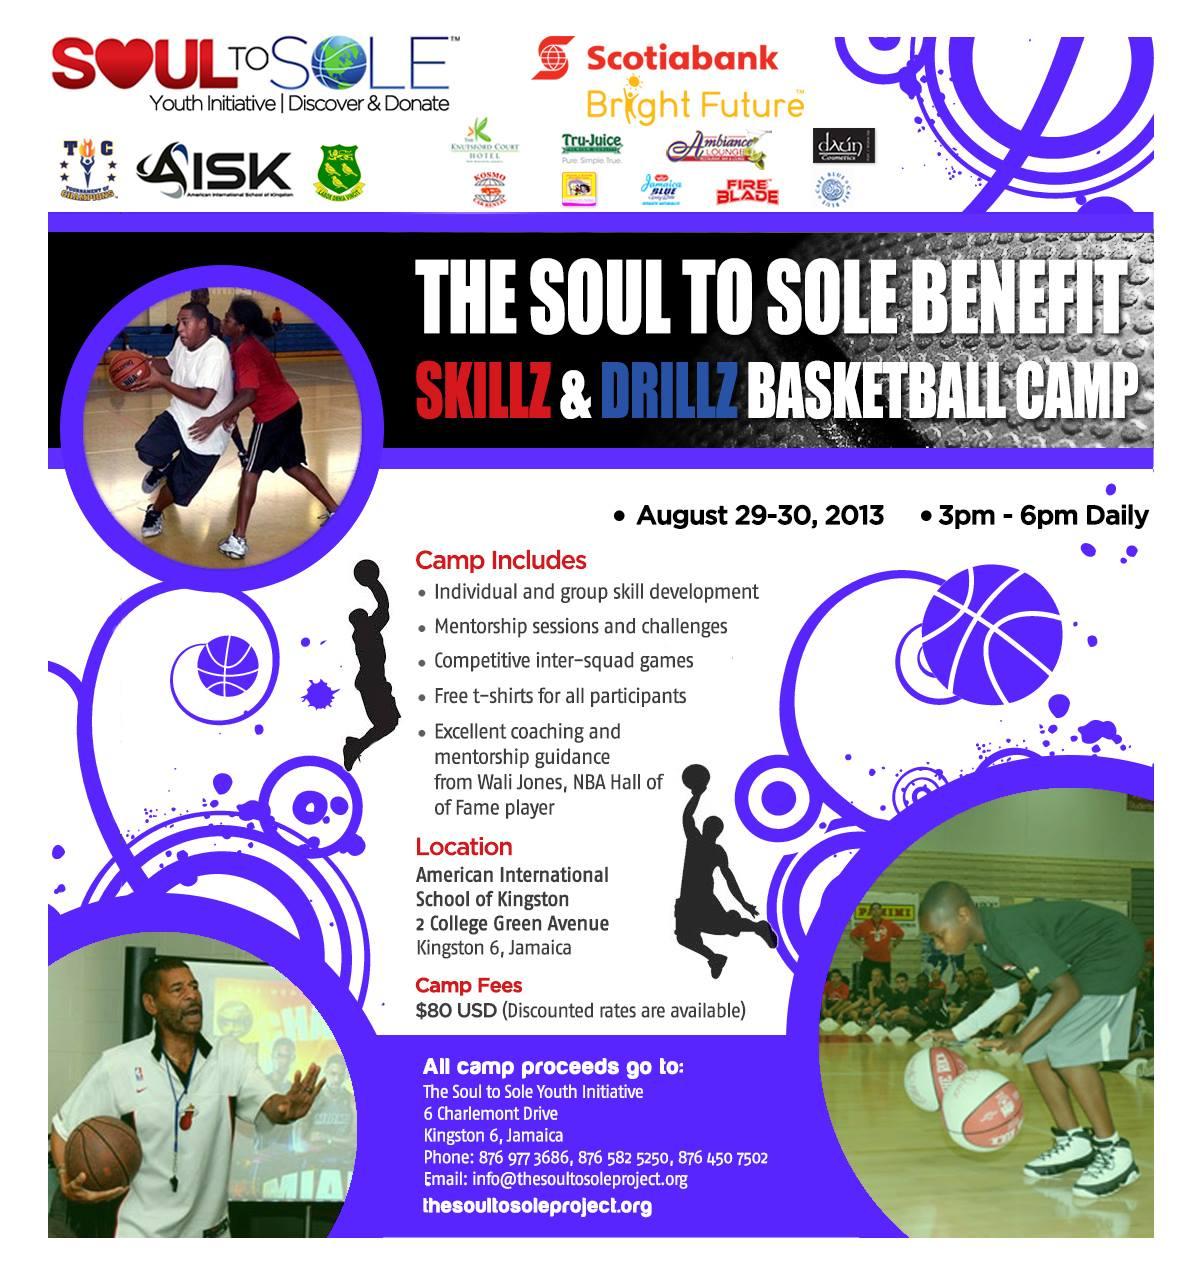 THE SCOTIABANK BRIGHT FUTURE AND S2S SKILLZ & DRILLZ BASKETBALL CAMP 2013